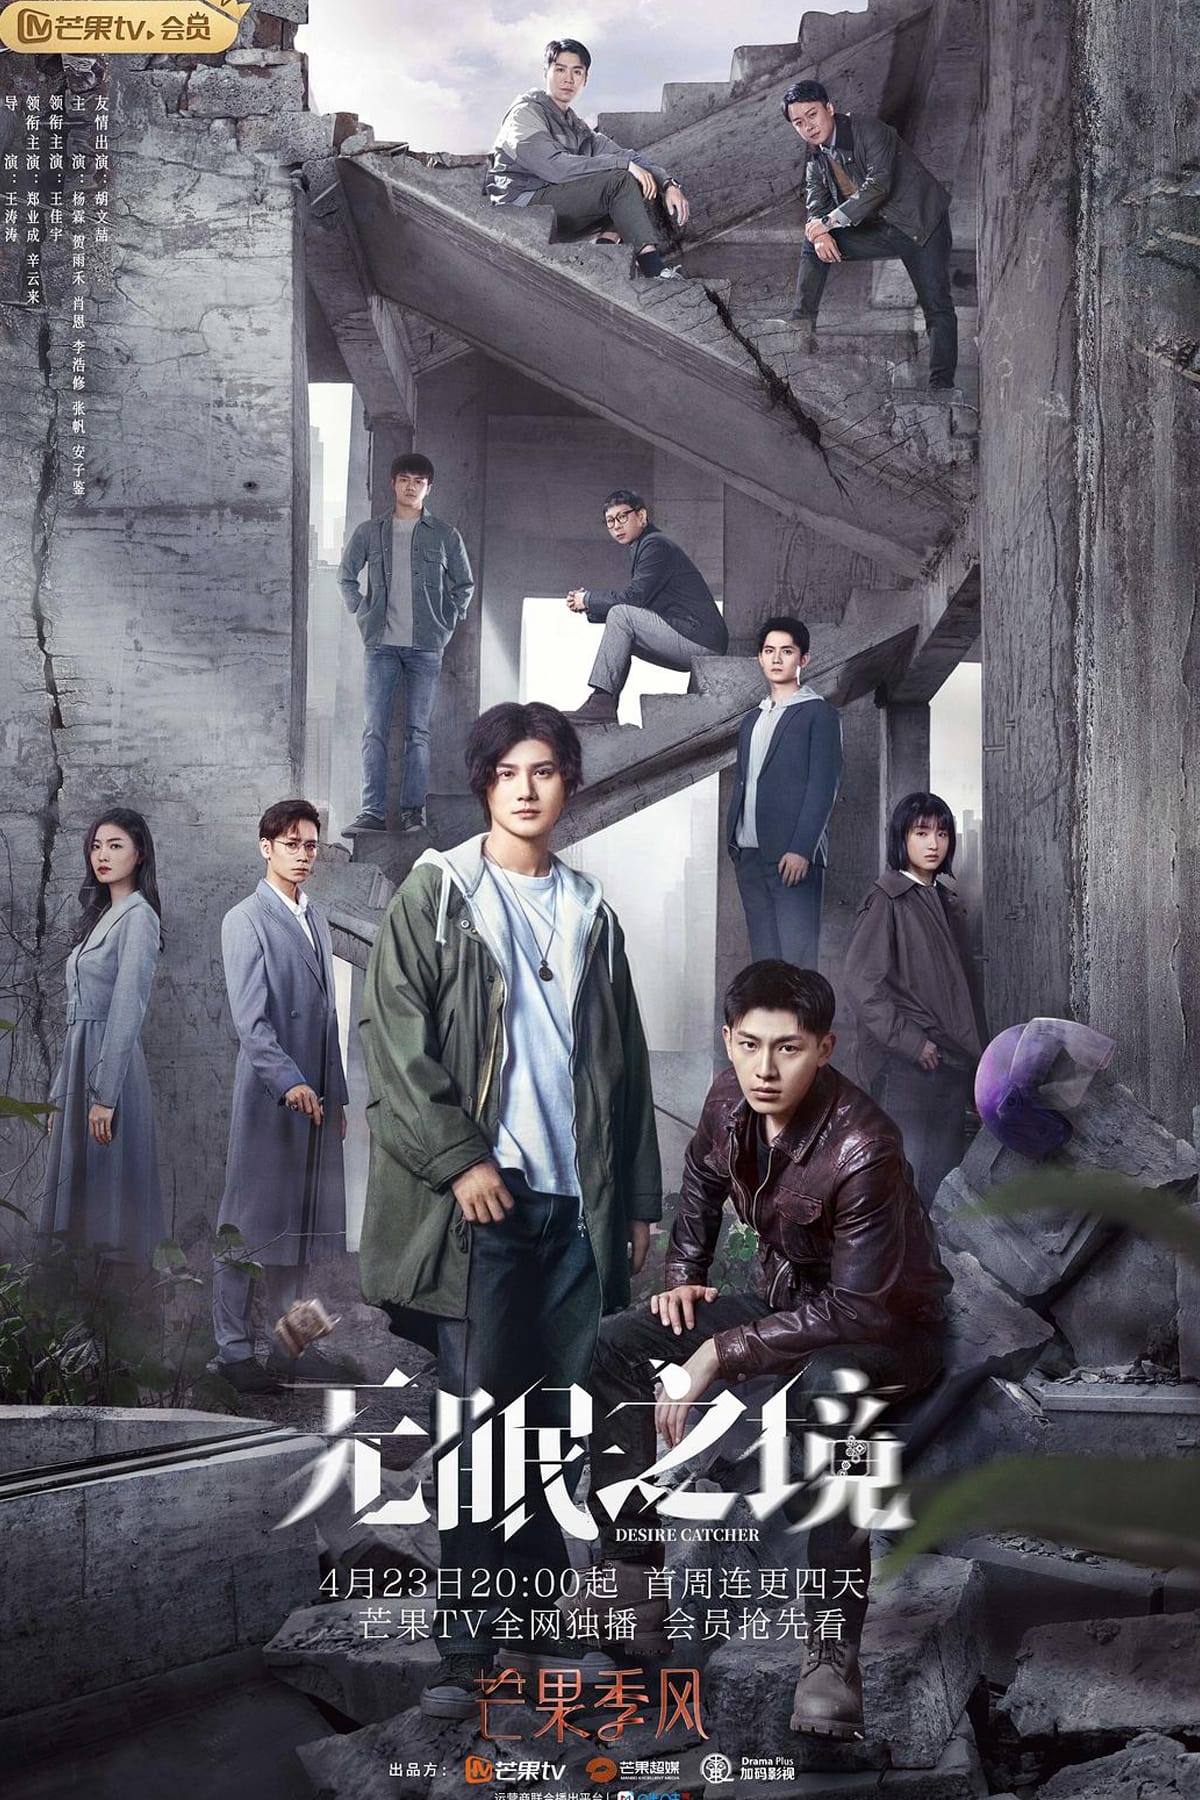 TV ratings for Desire Catcher (无眠之境) in the United States. Mango TV TV series